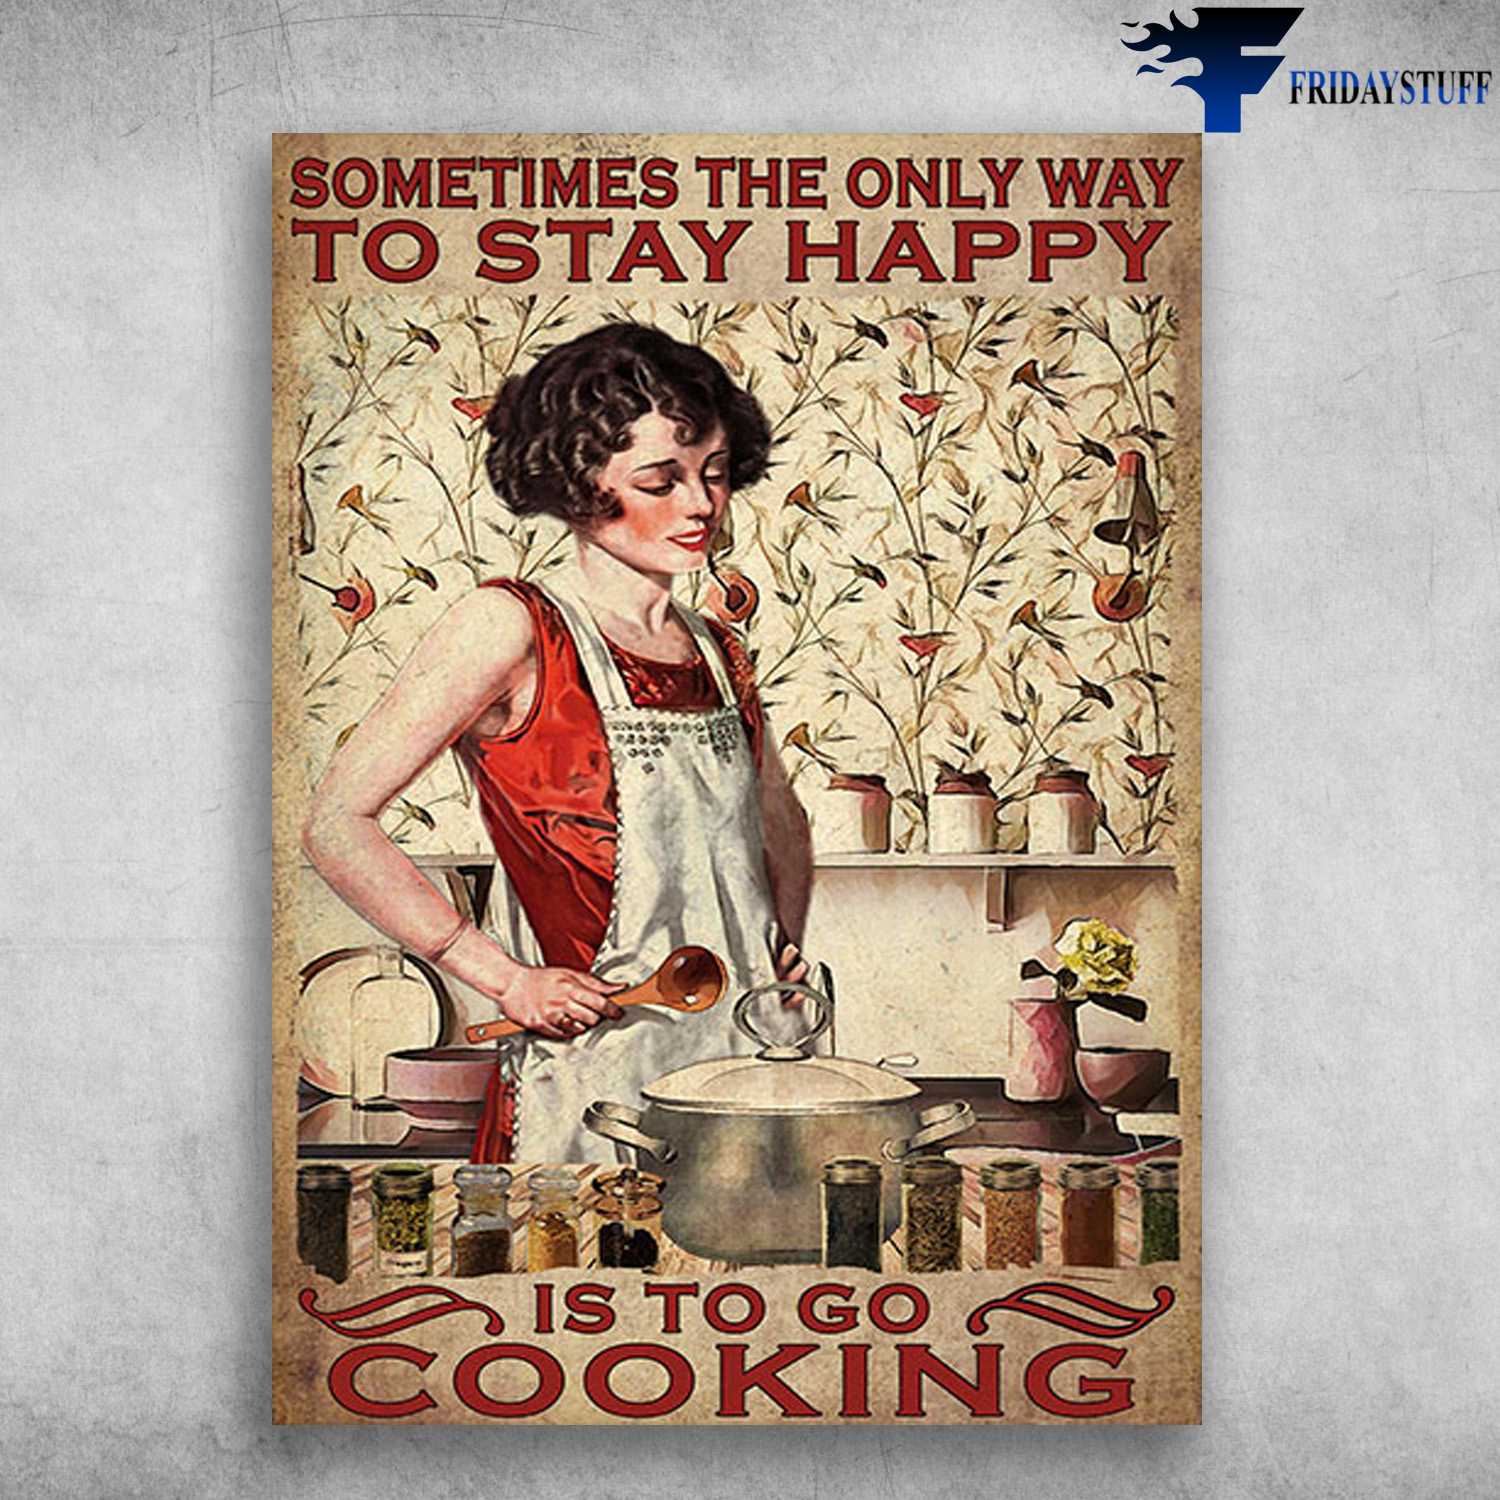 Cooking Lady - Sometimes The Only Way To Stay Happy, Is To Go Cooking